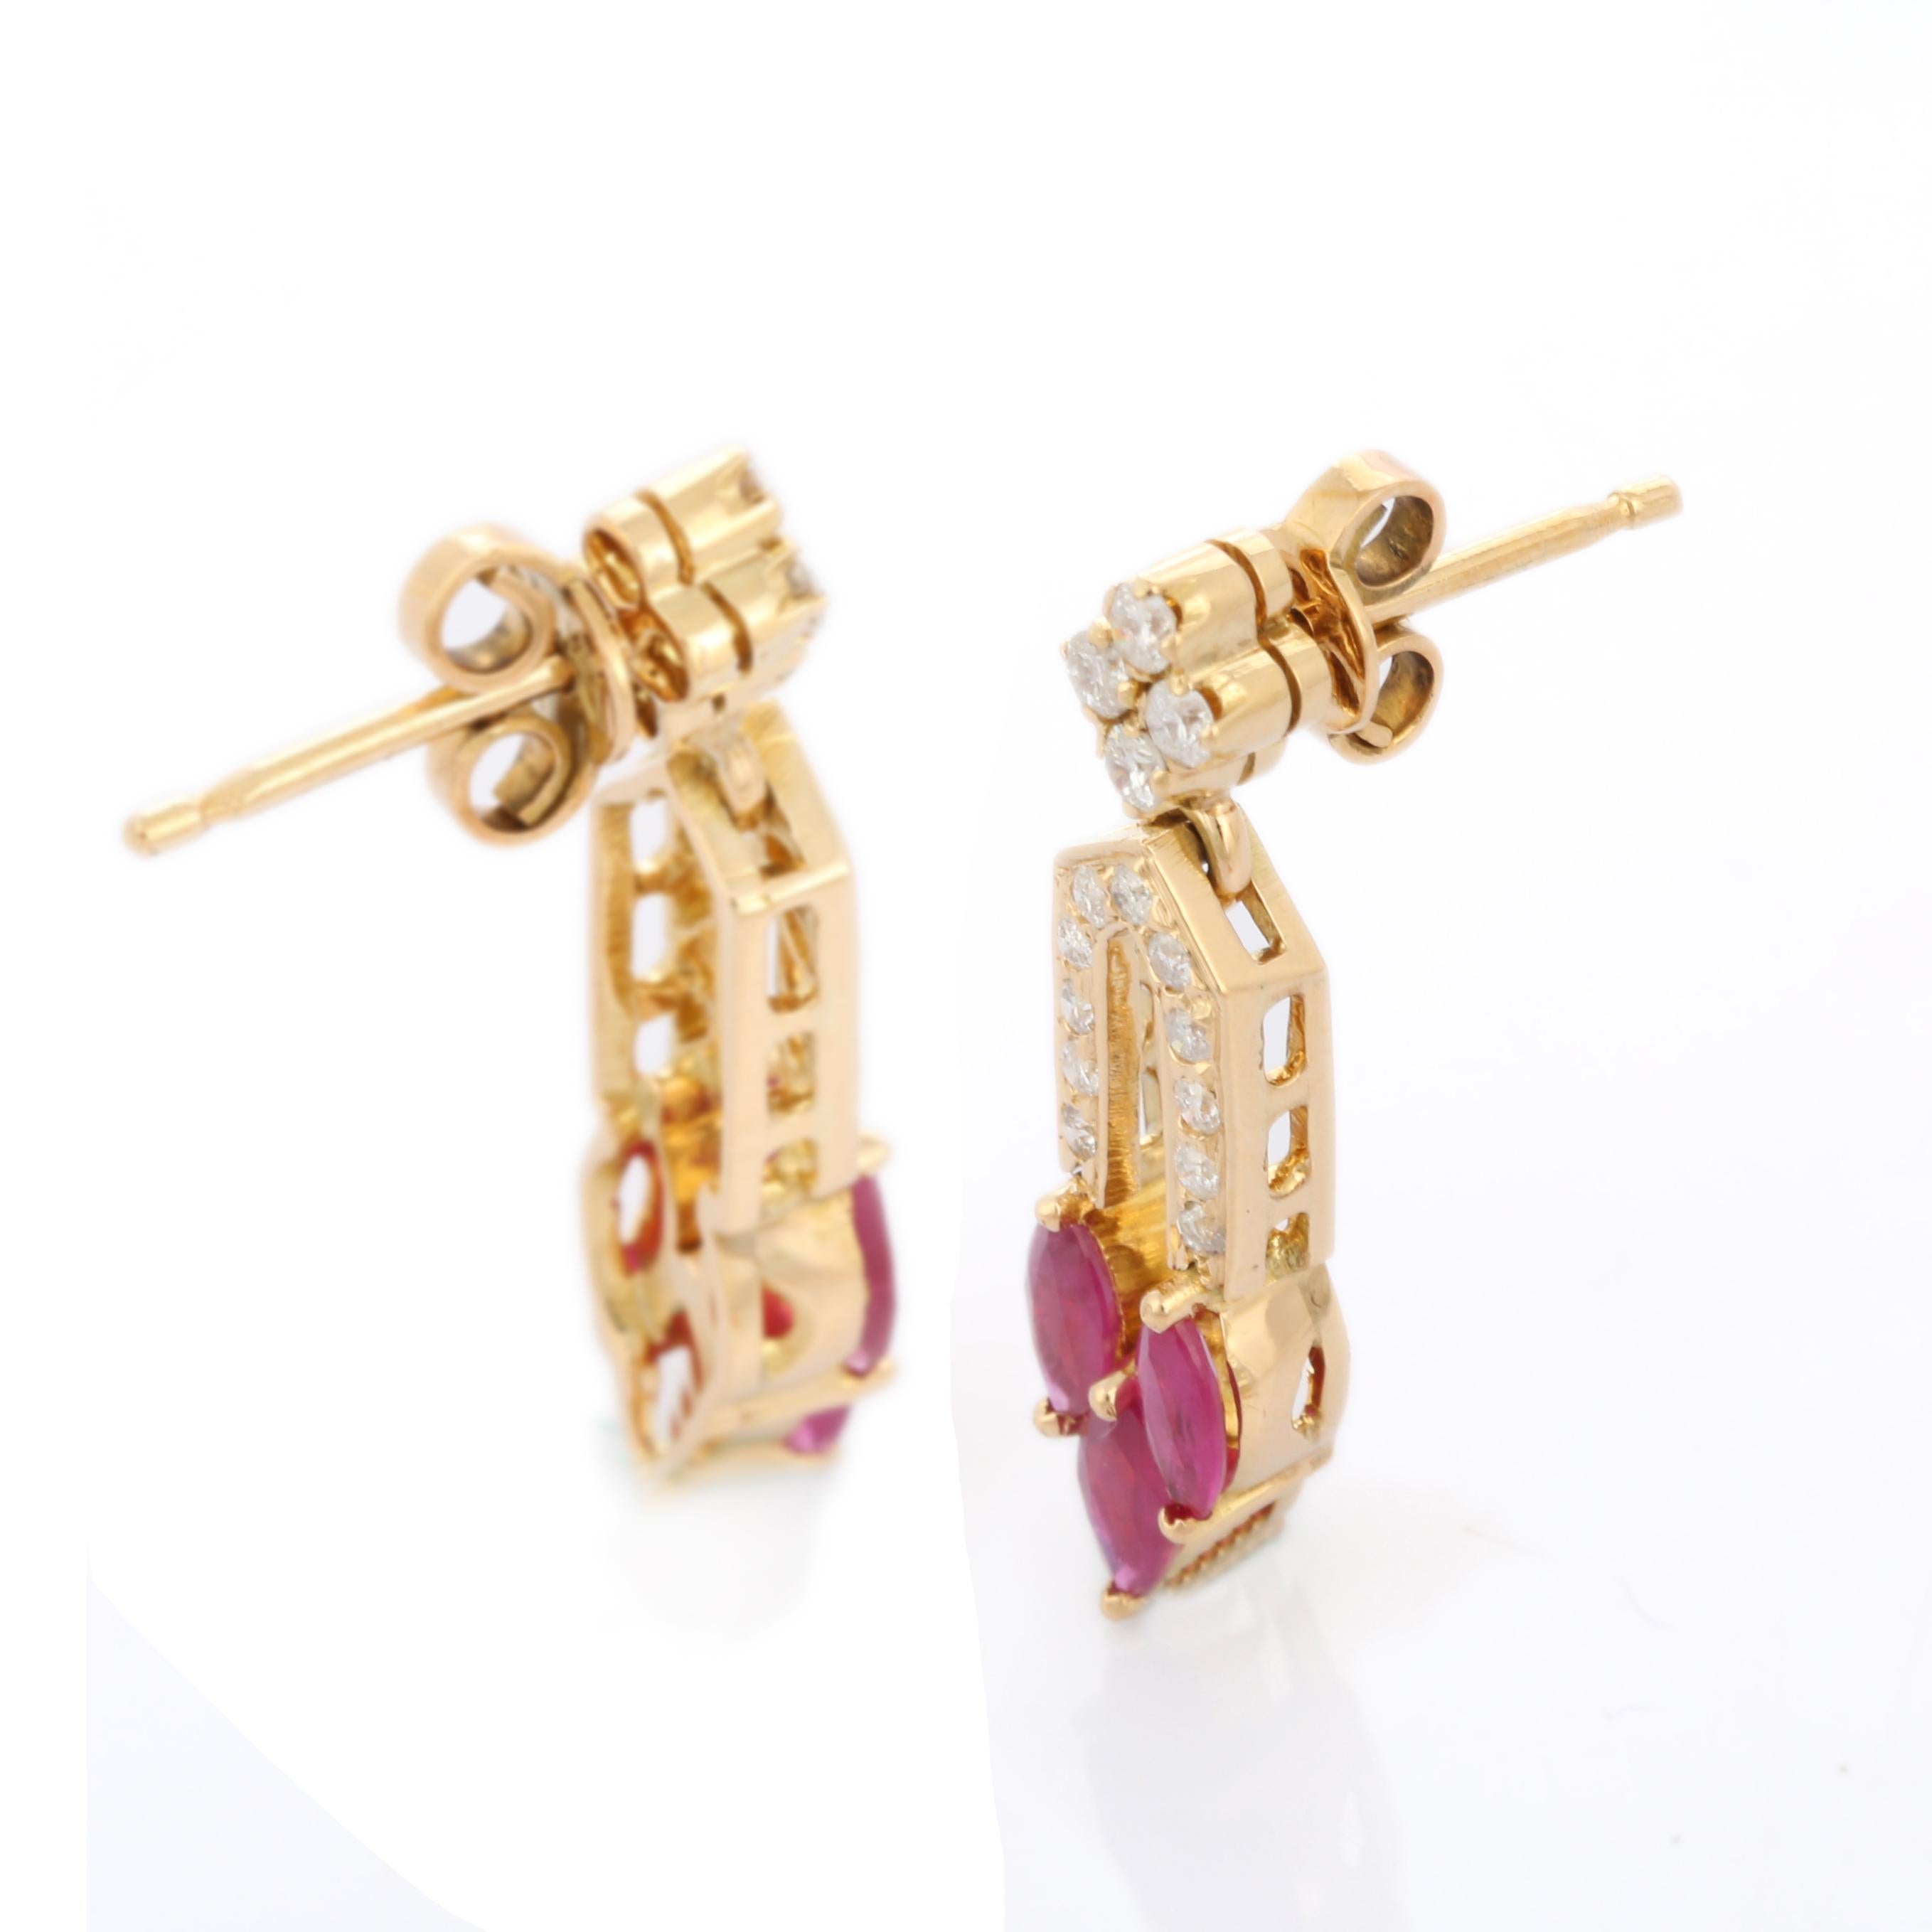 Ruby and Diamond Dangle earrings to make a statement with your look. These earrings create a sparkling, luxurious look featuring marquise cut gemstone.
If you love to gravitate towards unique styles, this piece of jewelry is perfect for